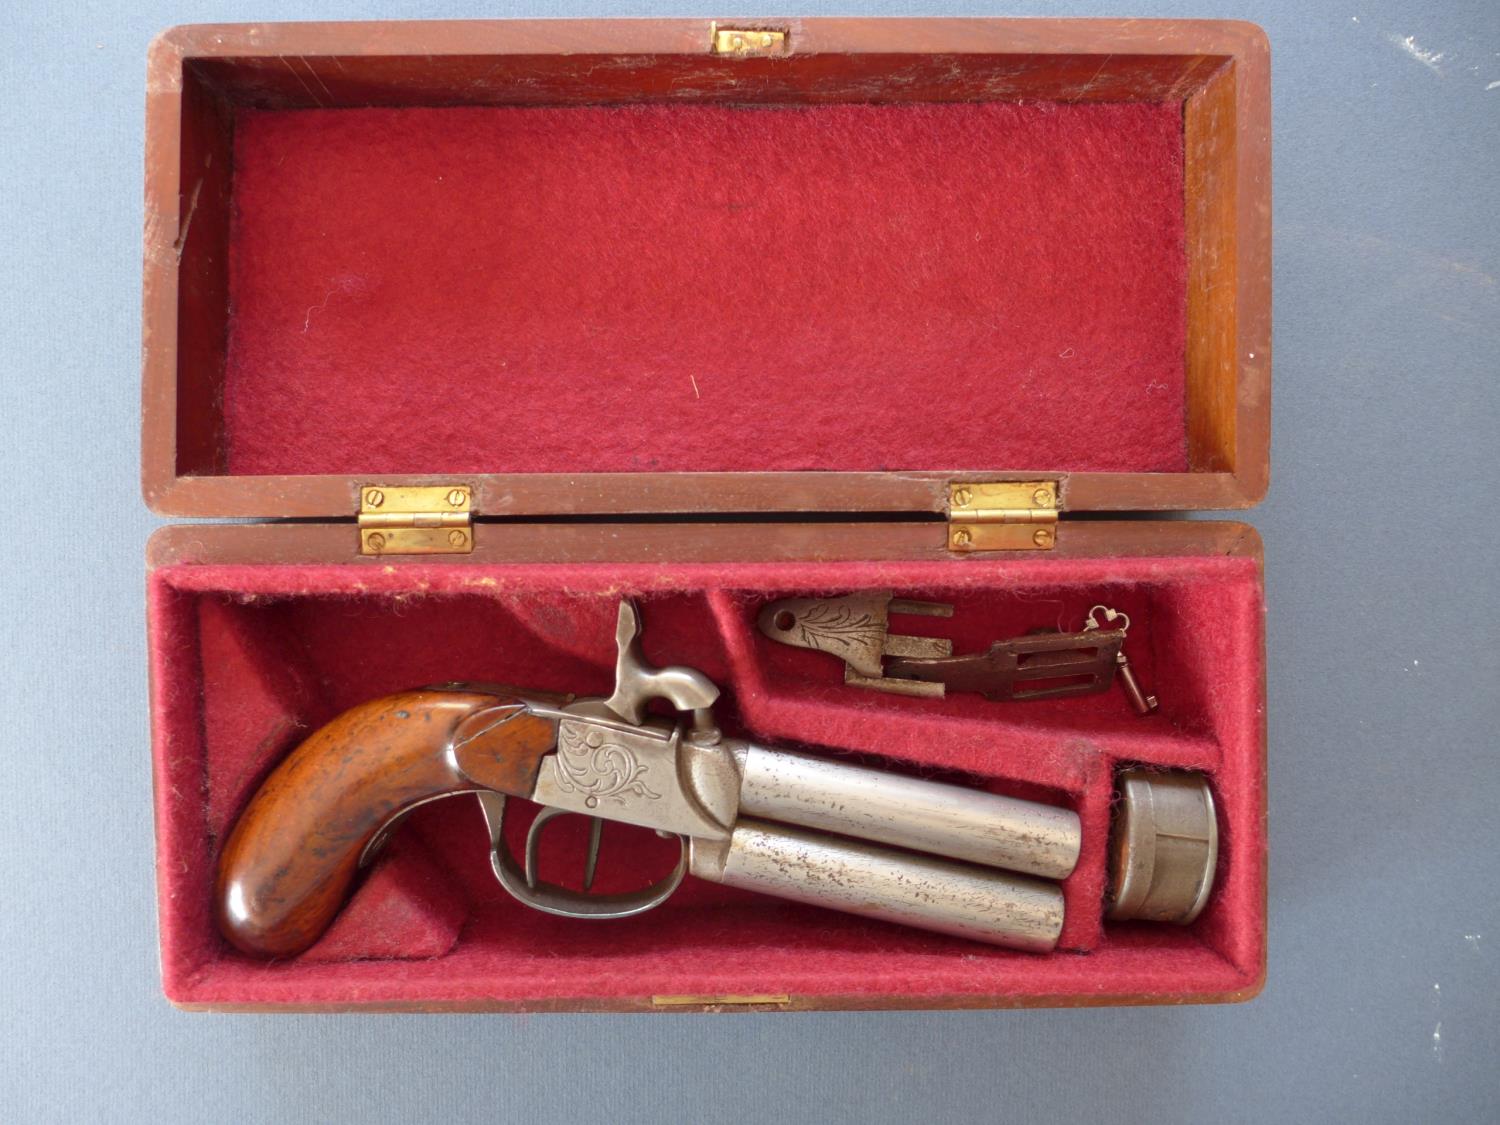 A LIEGE OVER AND UNDER PERCUSSION CAP PISTOL - 8 CM BARREL IN A FITTED MAHOGANY CASE